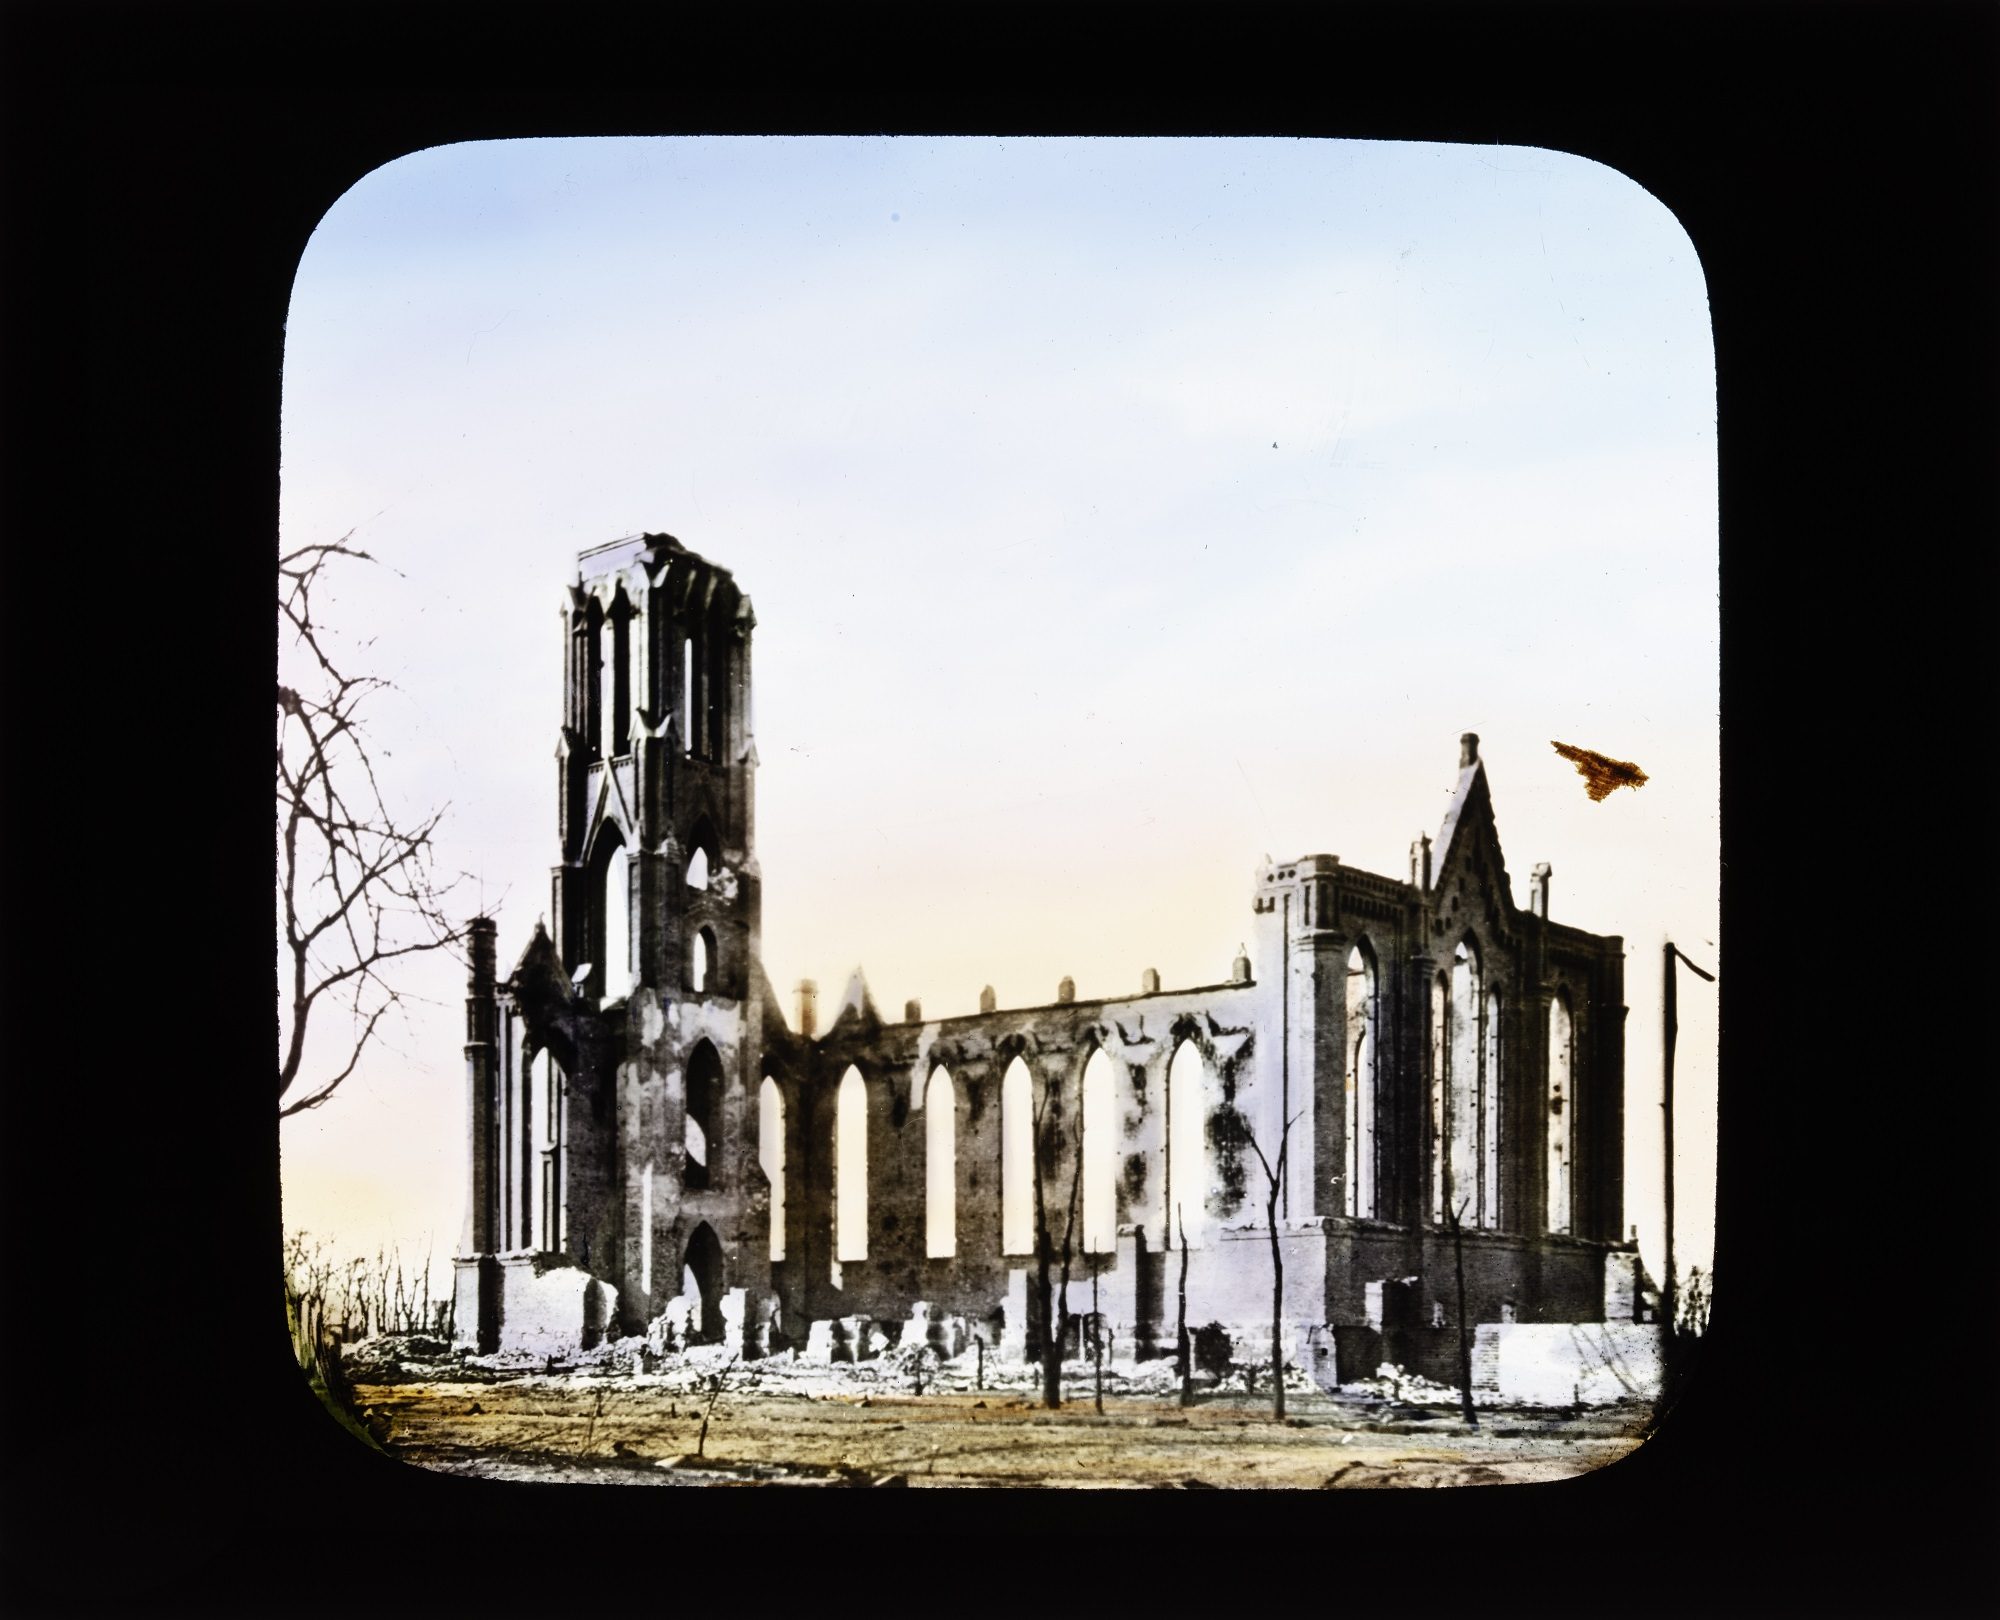 Hand-colored slide showing the exterior of the Holy Name Cathedral ruins after the Great Chicago Fire